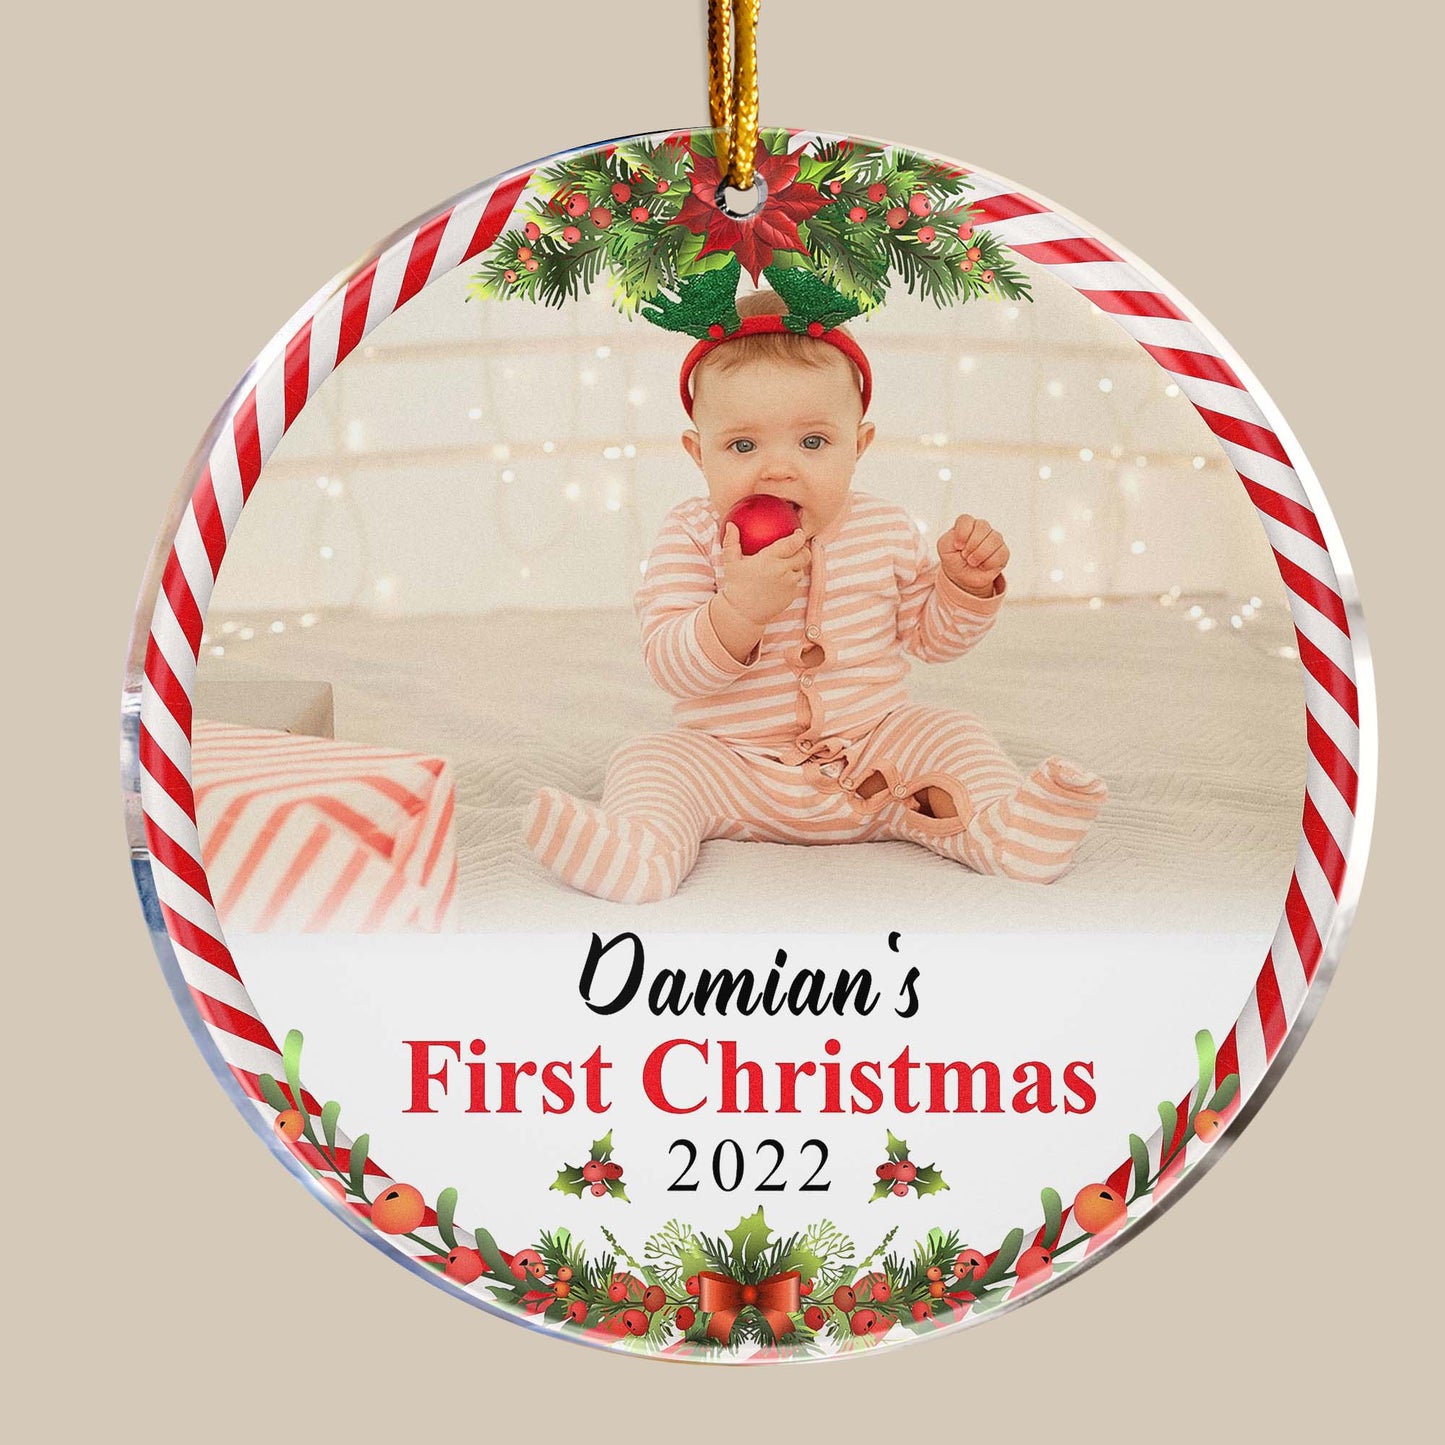 Baby Christmas - Personalized Circle Acrylic Ornament - Christmas Gift For Newborn Baby, New Baby, Baby Boy, Baby Girl